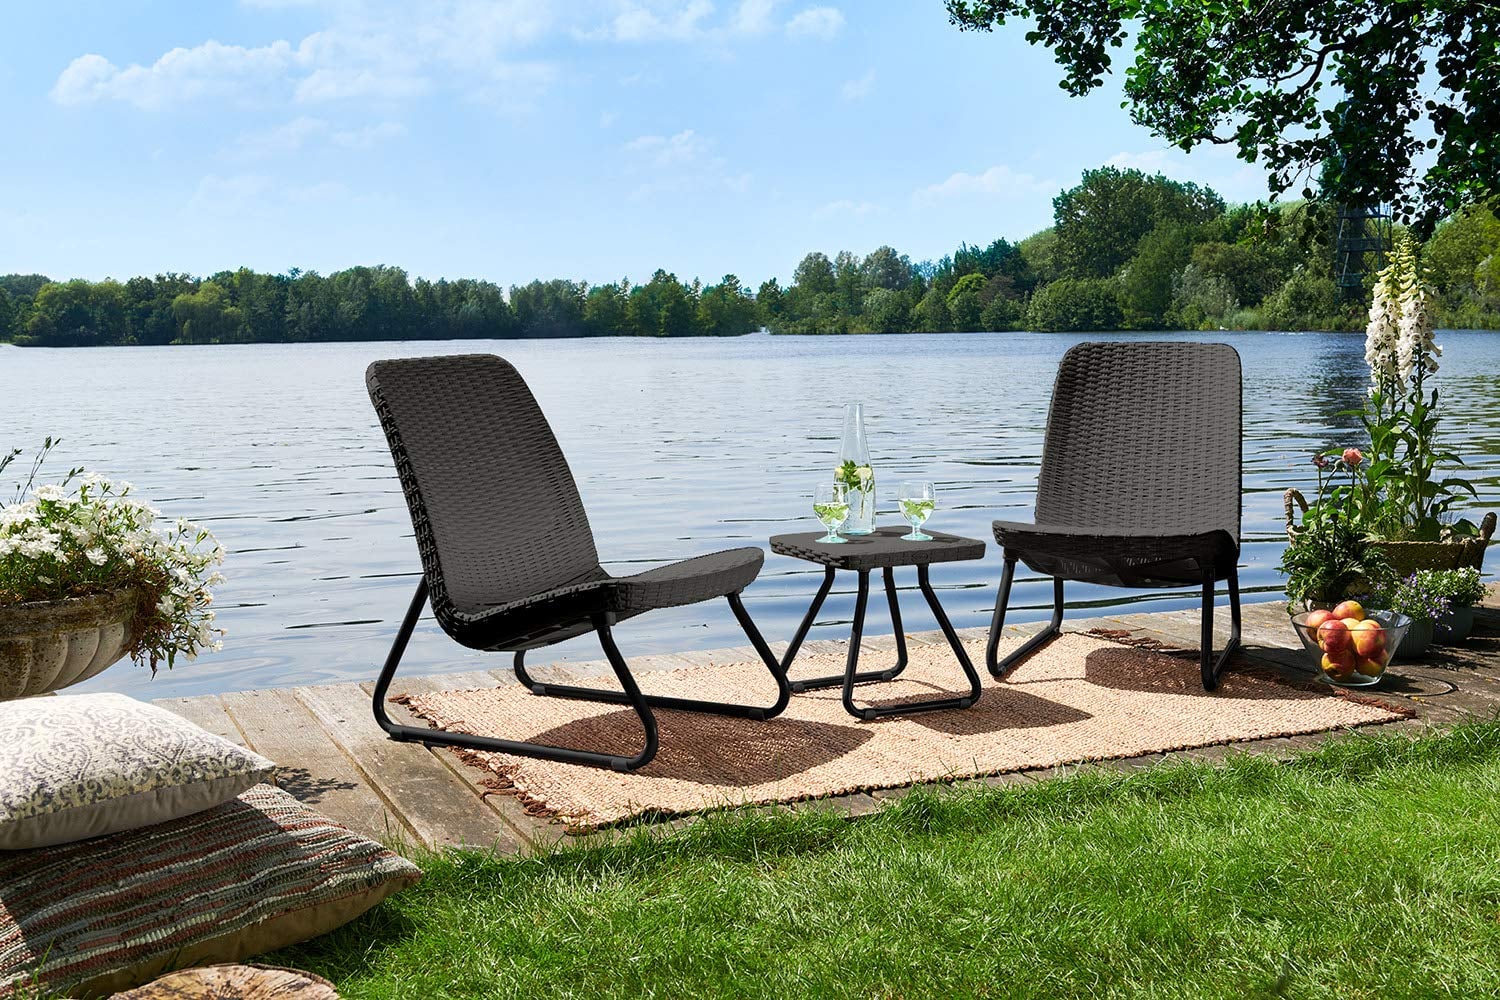 venster Inconsistent servet Durable Chairs: Keter Rio All Weather Patio Set | 15 Stunning  Outdoor-Furniture Finds You'll Never Guess Are From Amazon | POPSUGAR Home  Photo 2